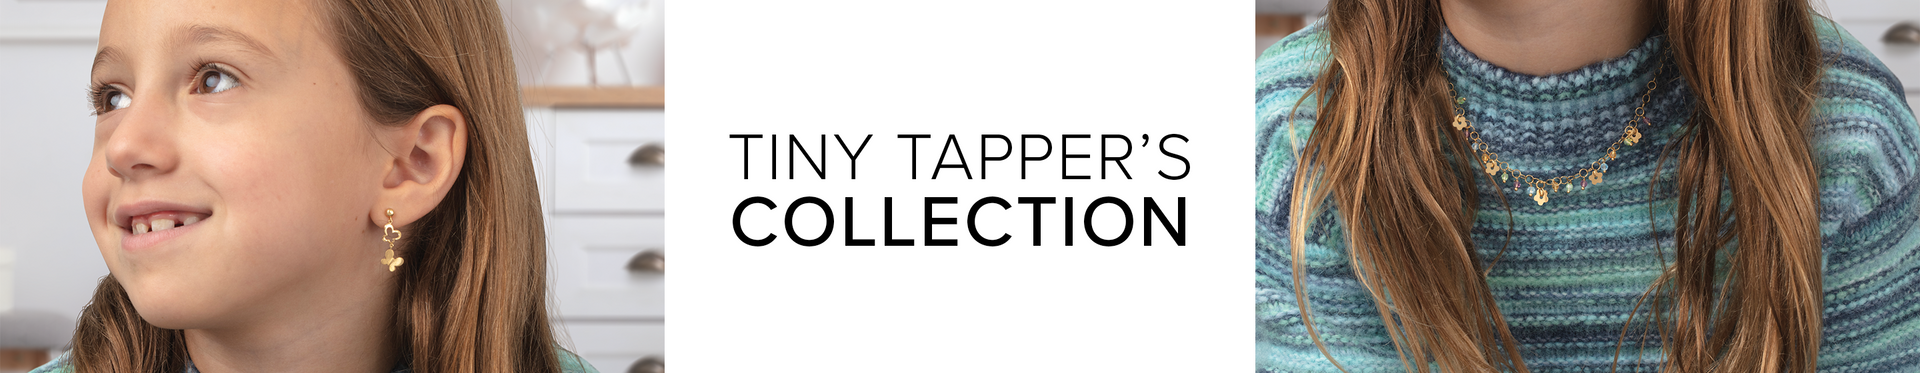 The Tiny Tapper's Collection